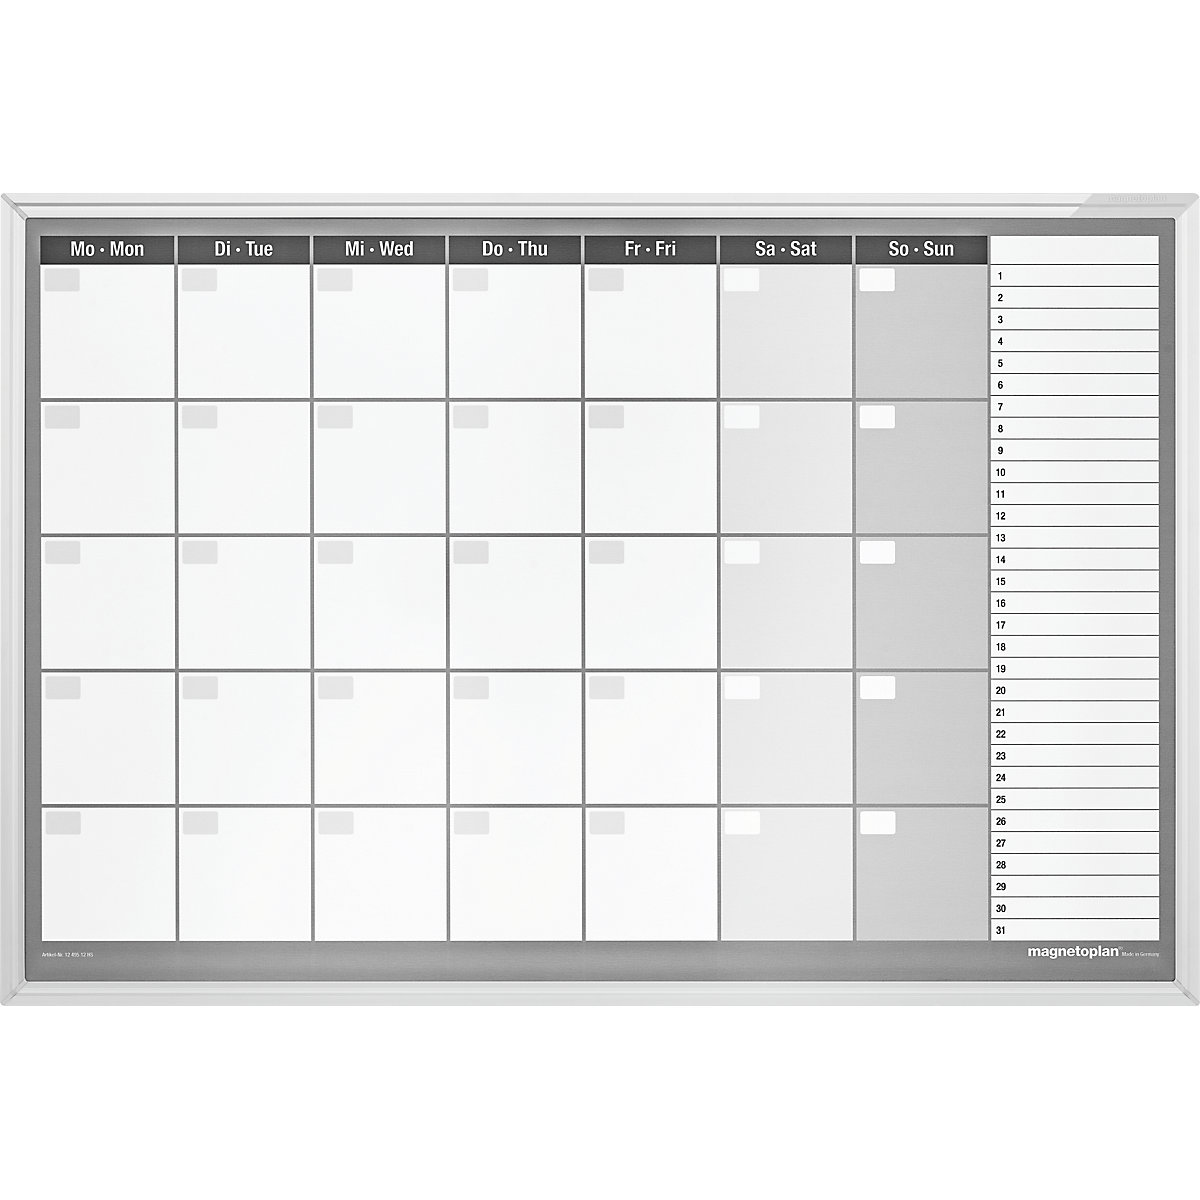 Monthly planner type CC, incl. accessories set – magnetoplan